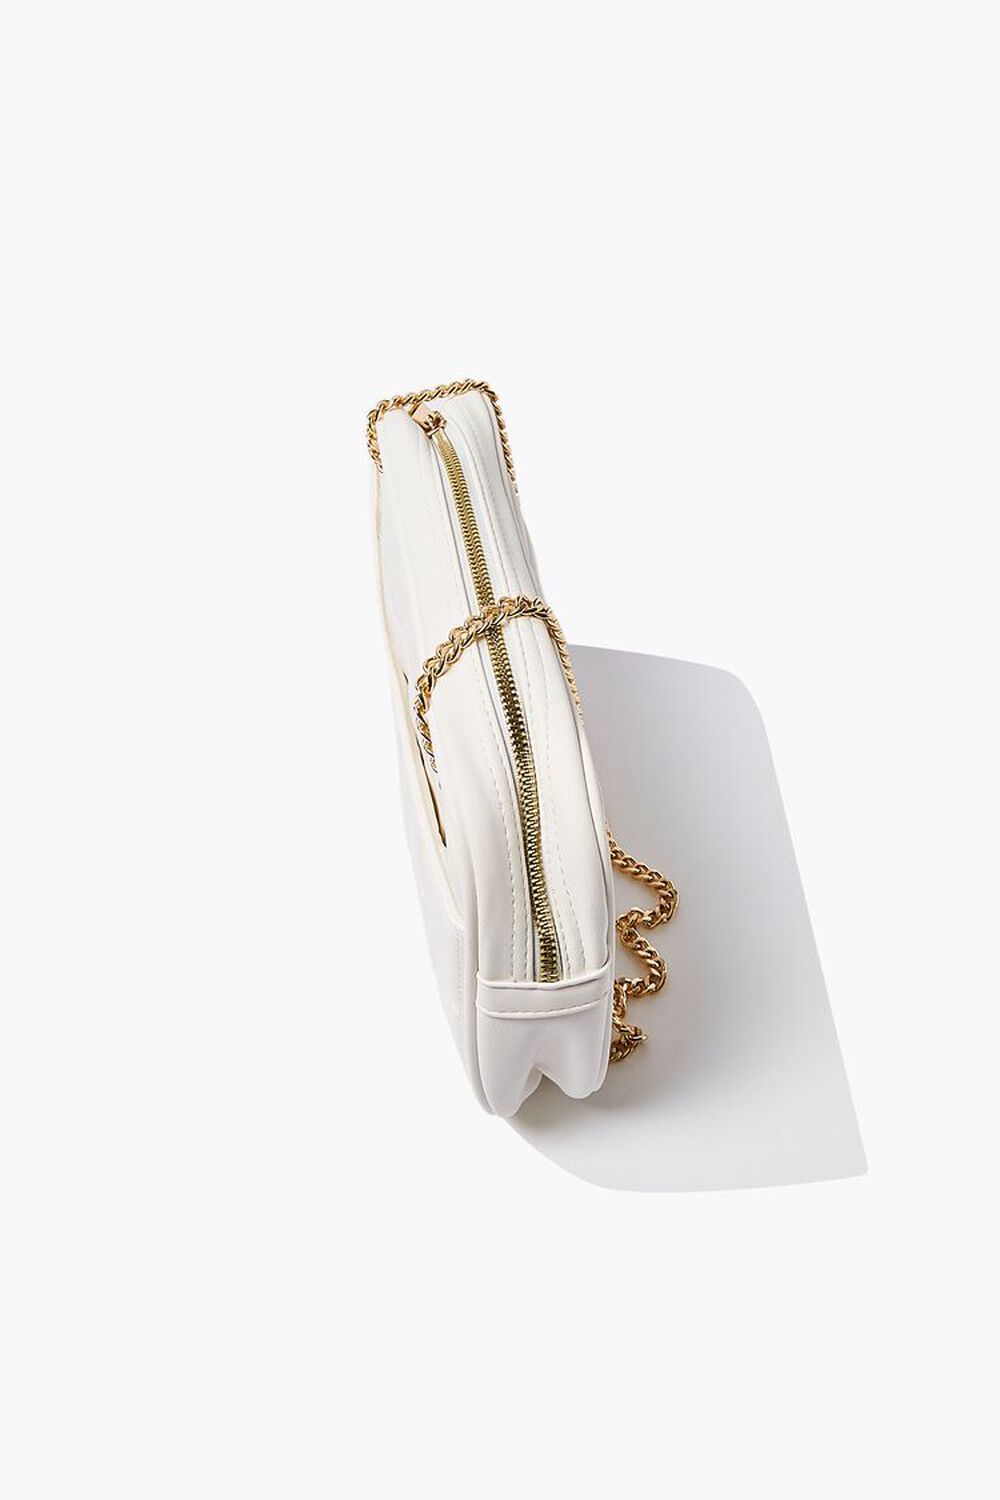 WHITE Quilted Crossbody Bag, image 3